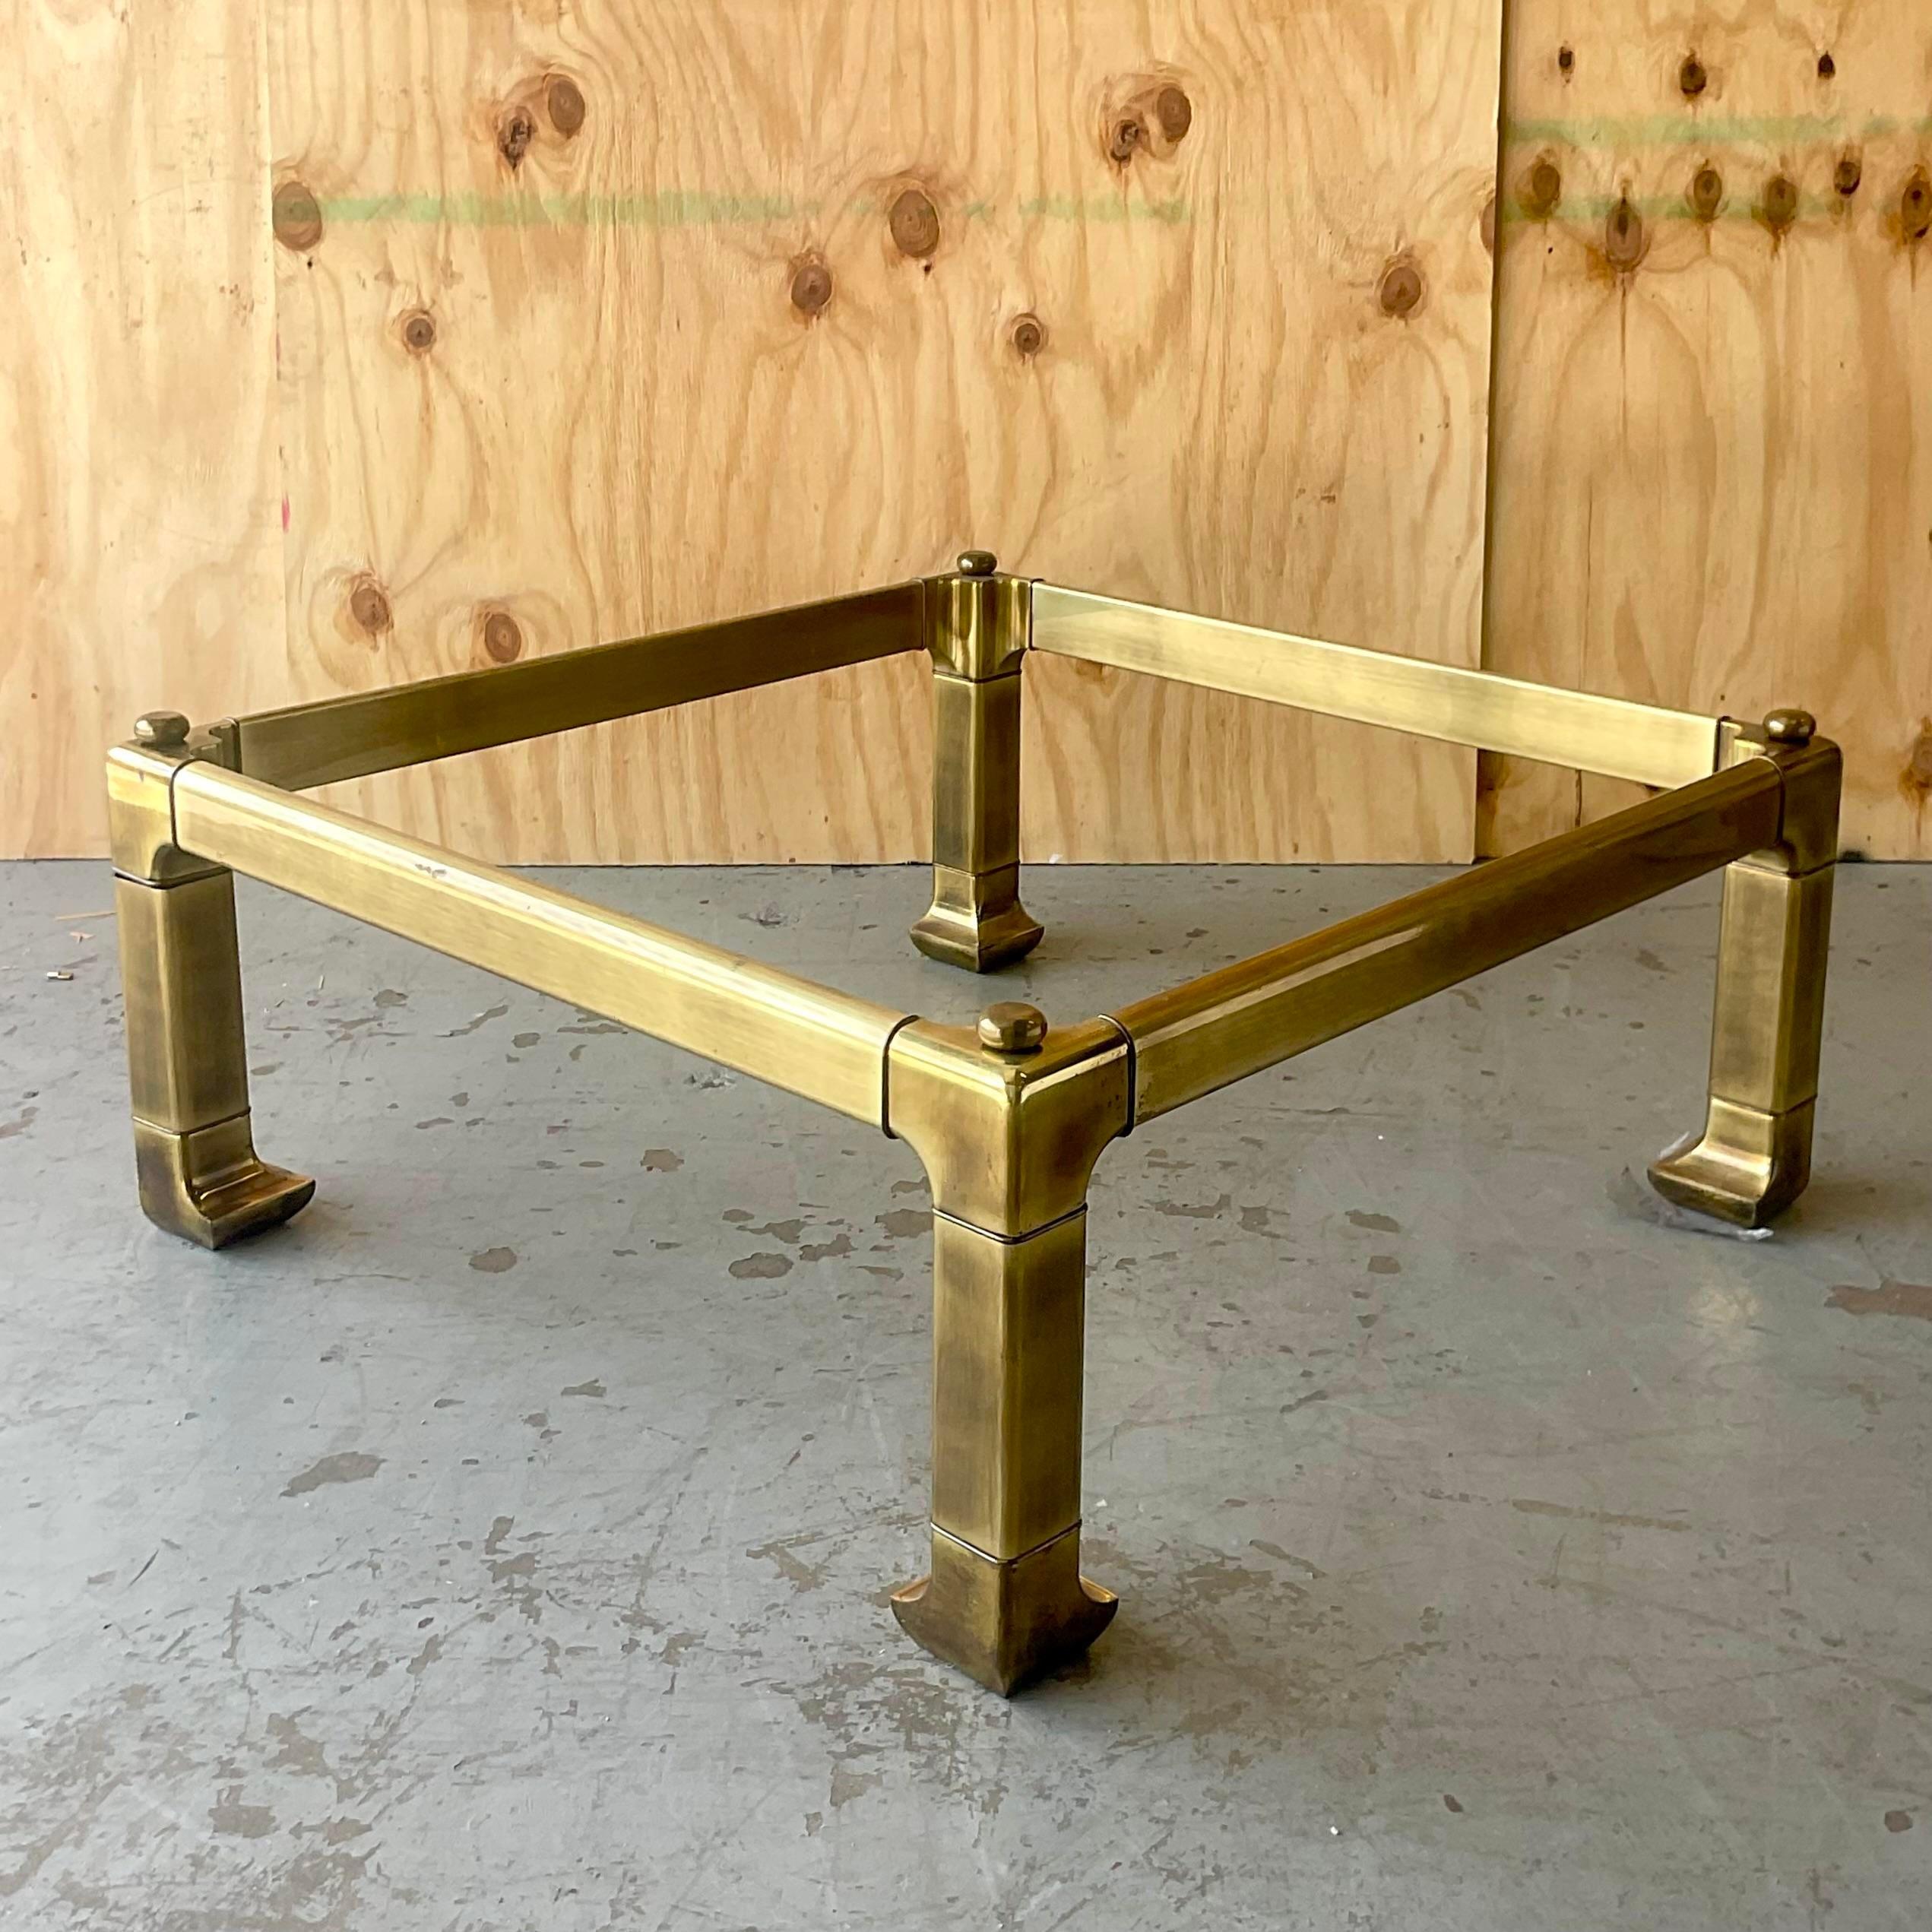 Late 20th Century Vintage Regency Brass Coffee Table After Mastercraft In Good Condition For Sale In west palm beach, FL